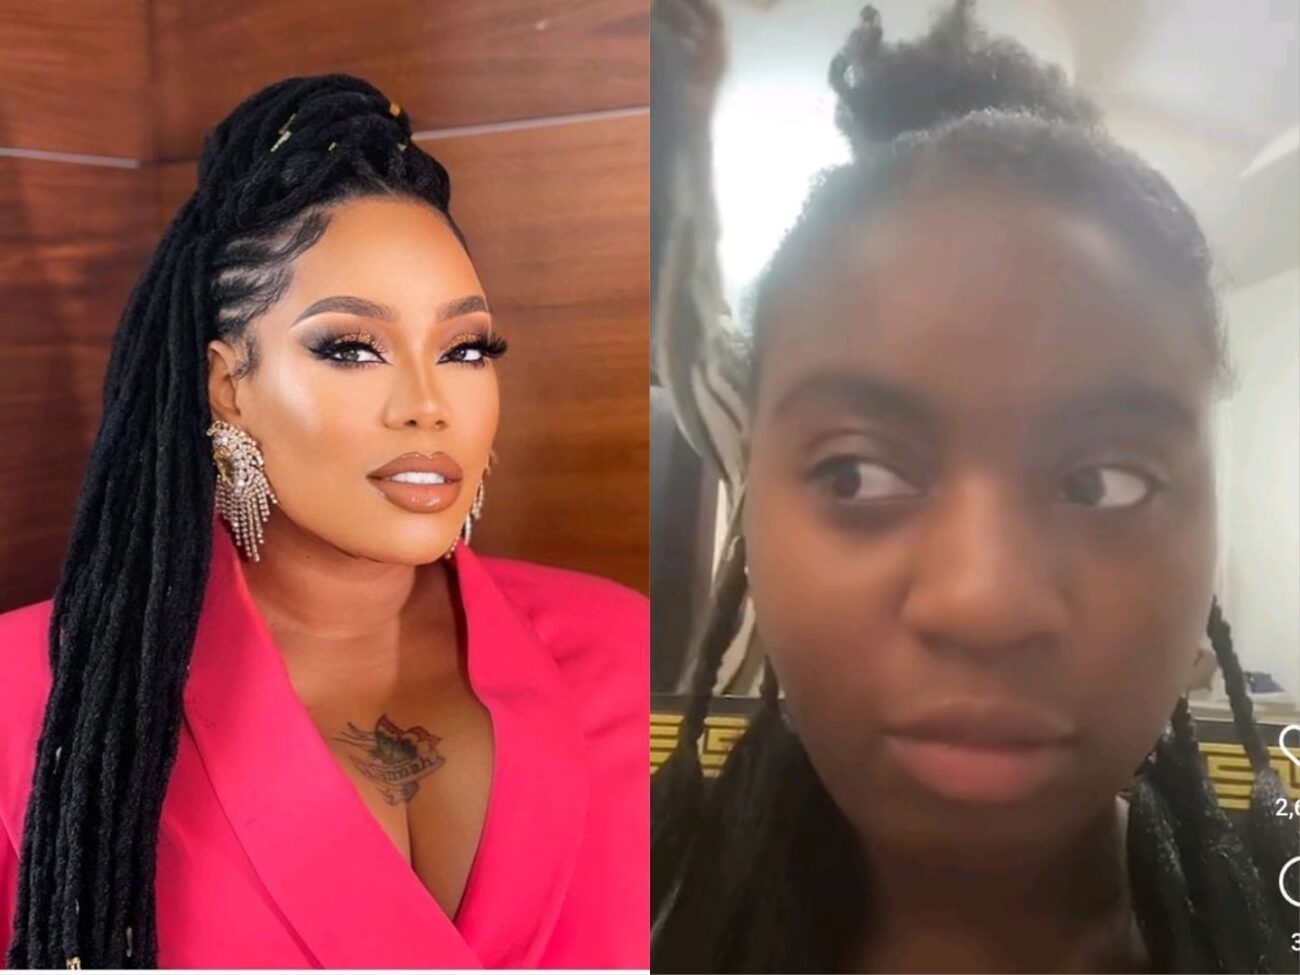 ‘Why my daughter, Tiannah is dark and I am light skinned’ – Toyin Lawani